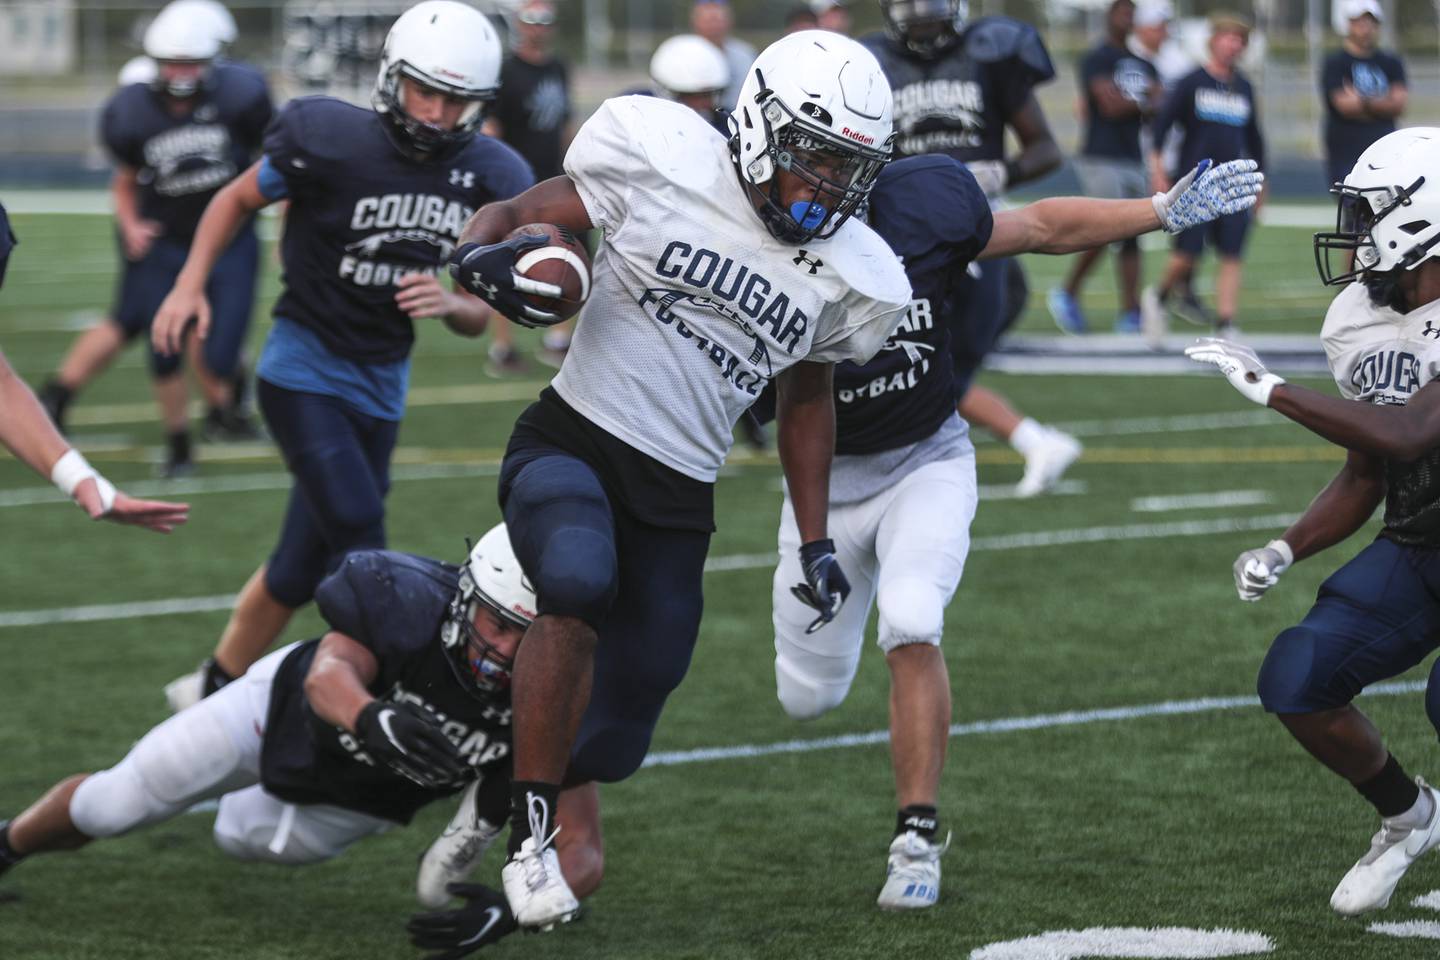 Plainfield South running back Brian Stanton breaks a tackle on Wednesday, Aug. 18, 2021, at Plainfield South High School in Plainfield, Ill.